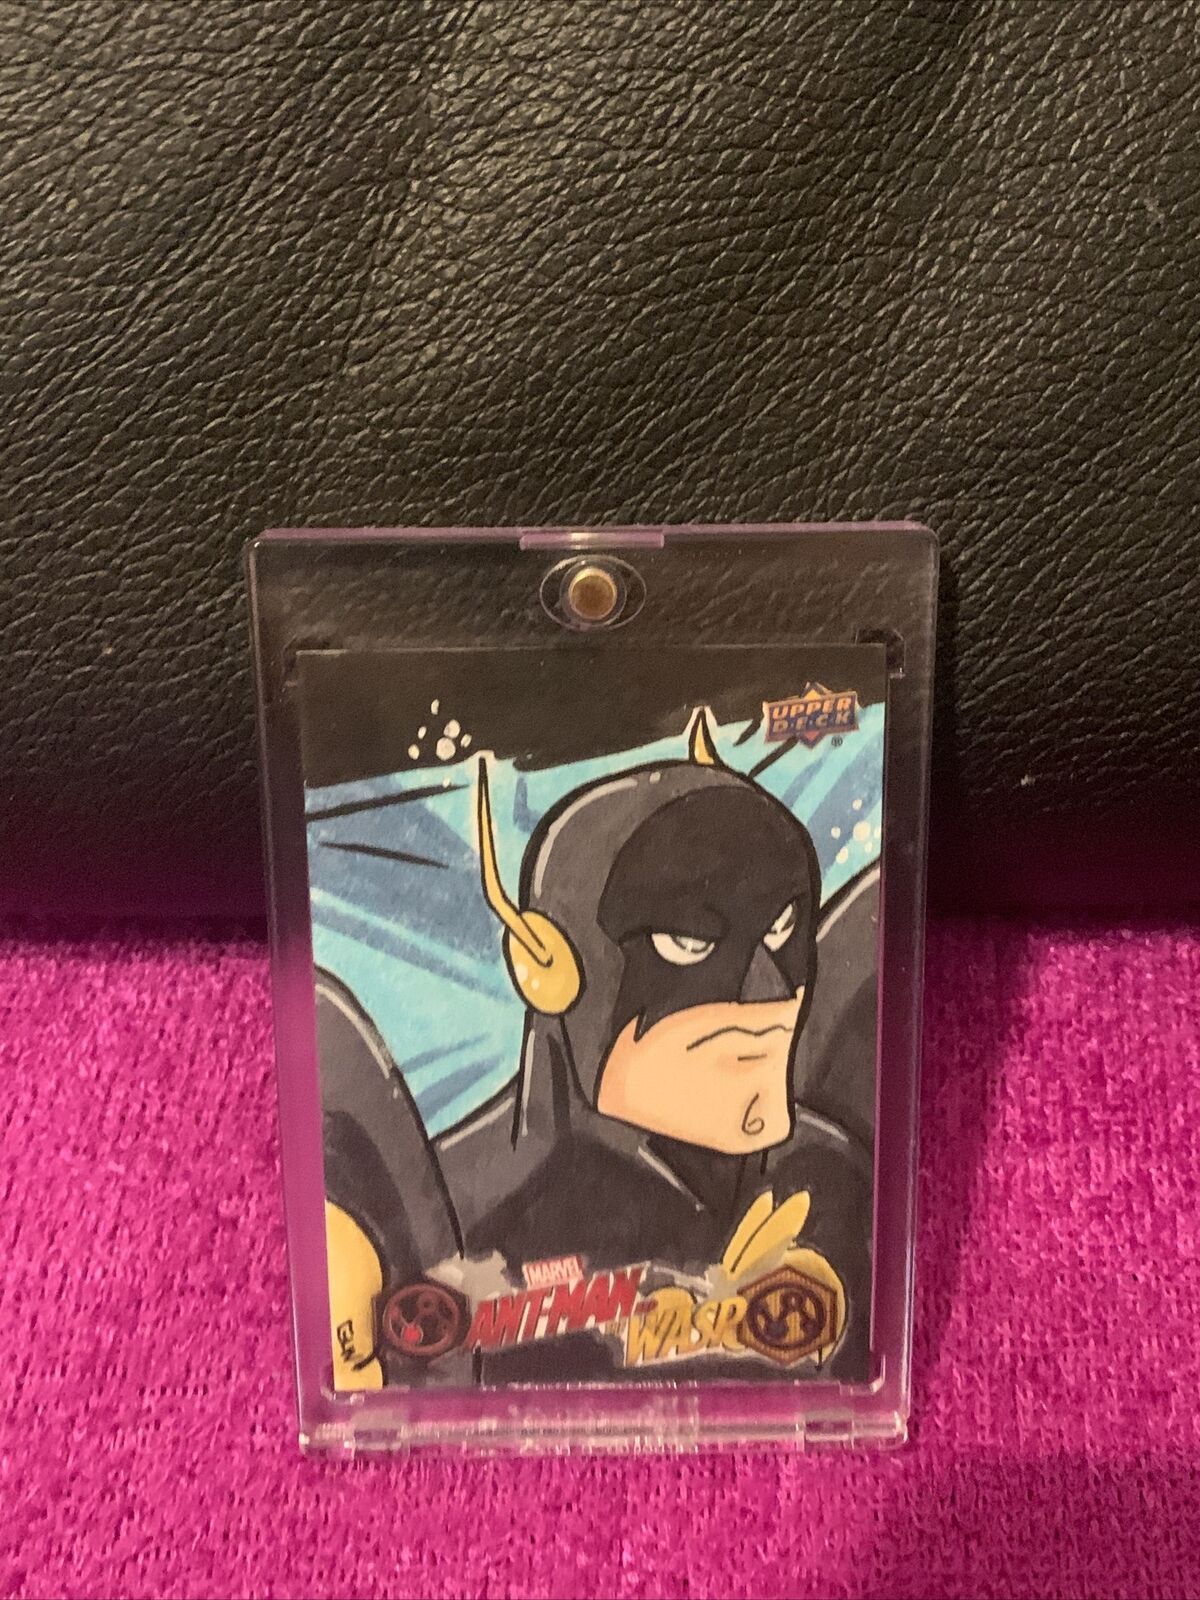 2018 UD MARVEL ANT-MAN AND THE WASP ARTIST BATMAN SKETCH CARD SP# 1/1 WILLS